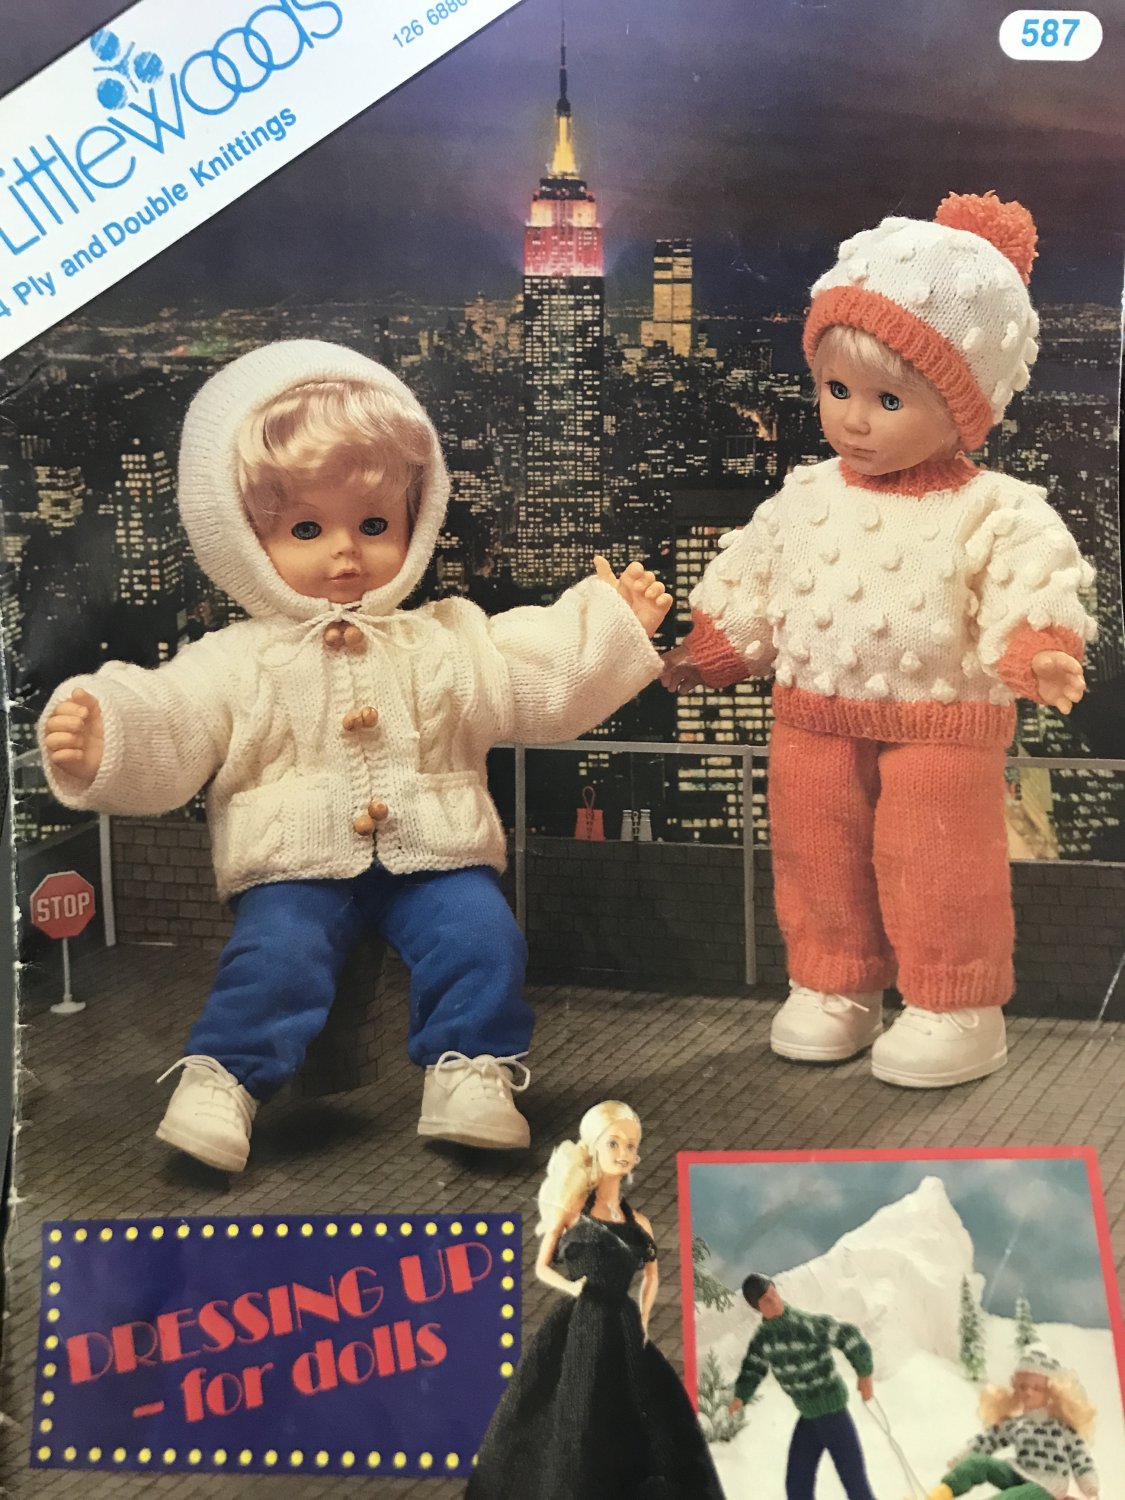 Dressing up for Dolls Knitting Pattern for clothes by Littlewoods 587